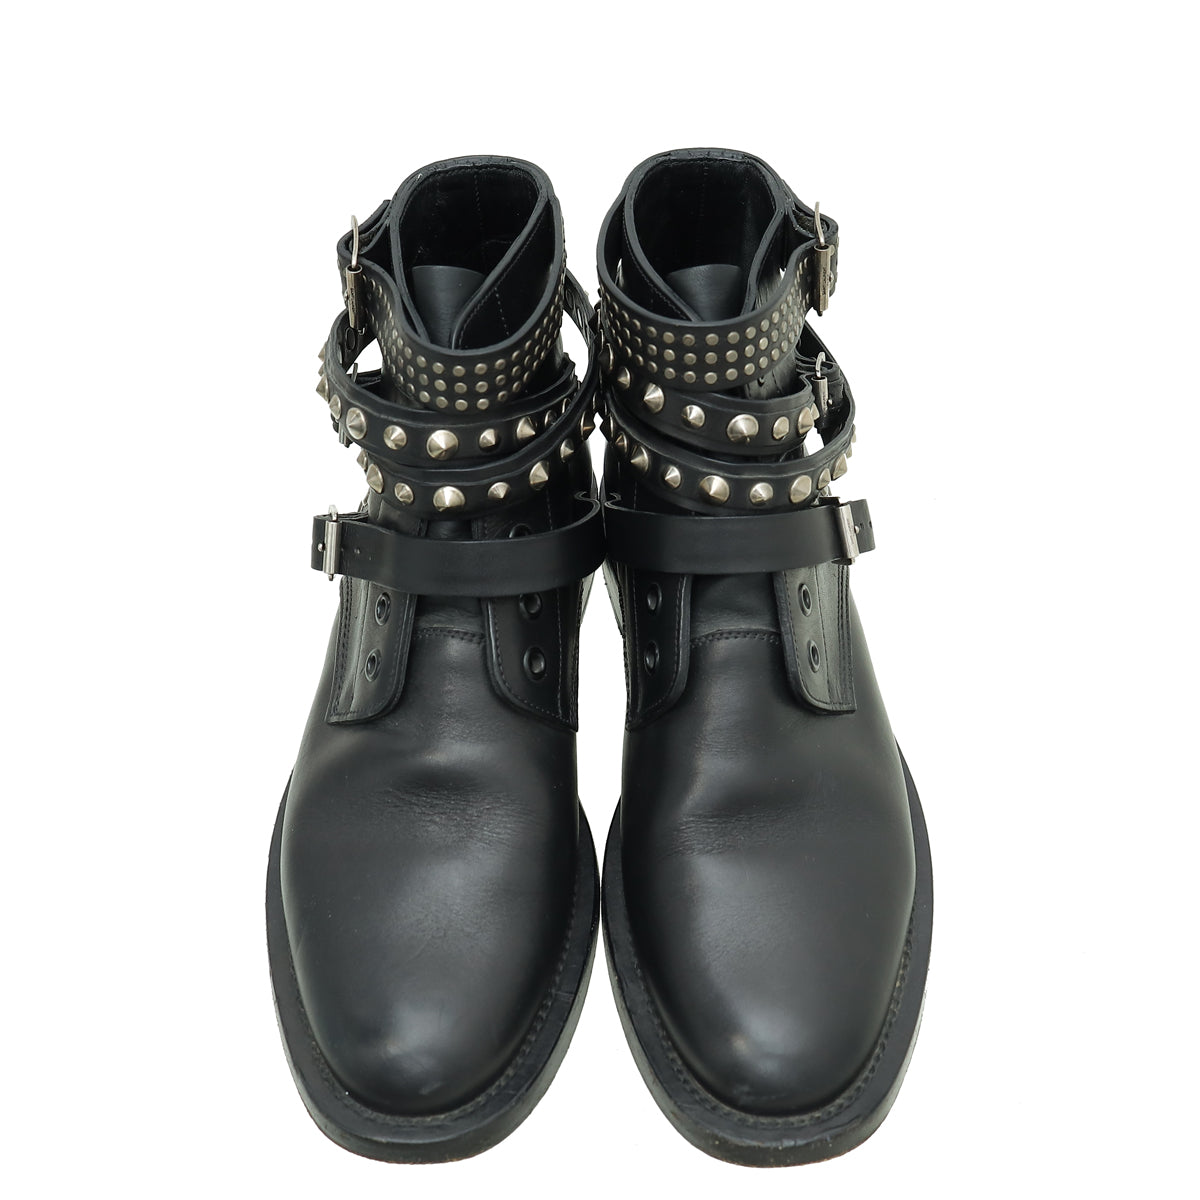 YSL Black Studded Ankle High Boots 39.5